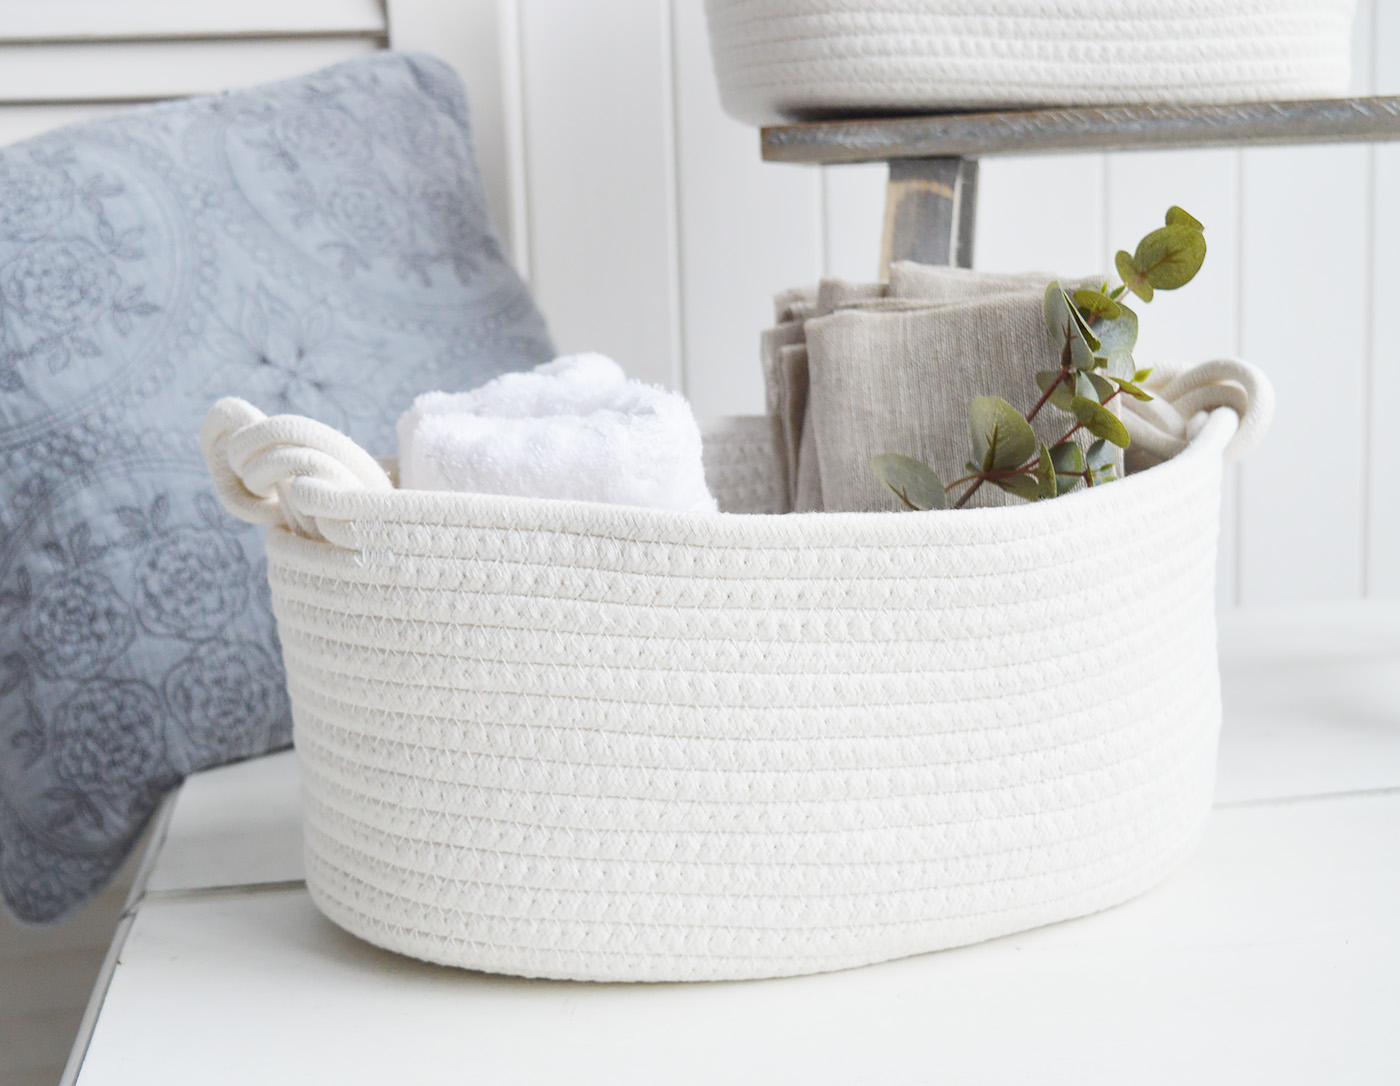 Set of Hove White Soft Cotton Basket. New England Coastal, Country and Modern Farmhouse furniture and interiors from The White Lighthouse